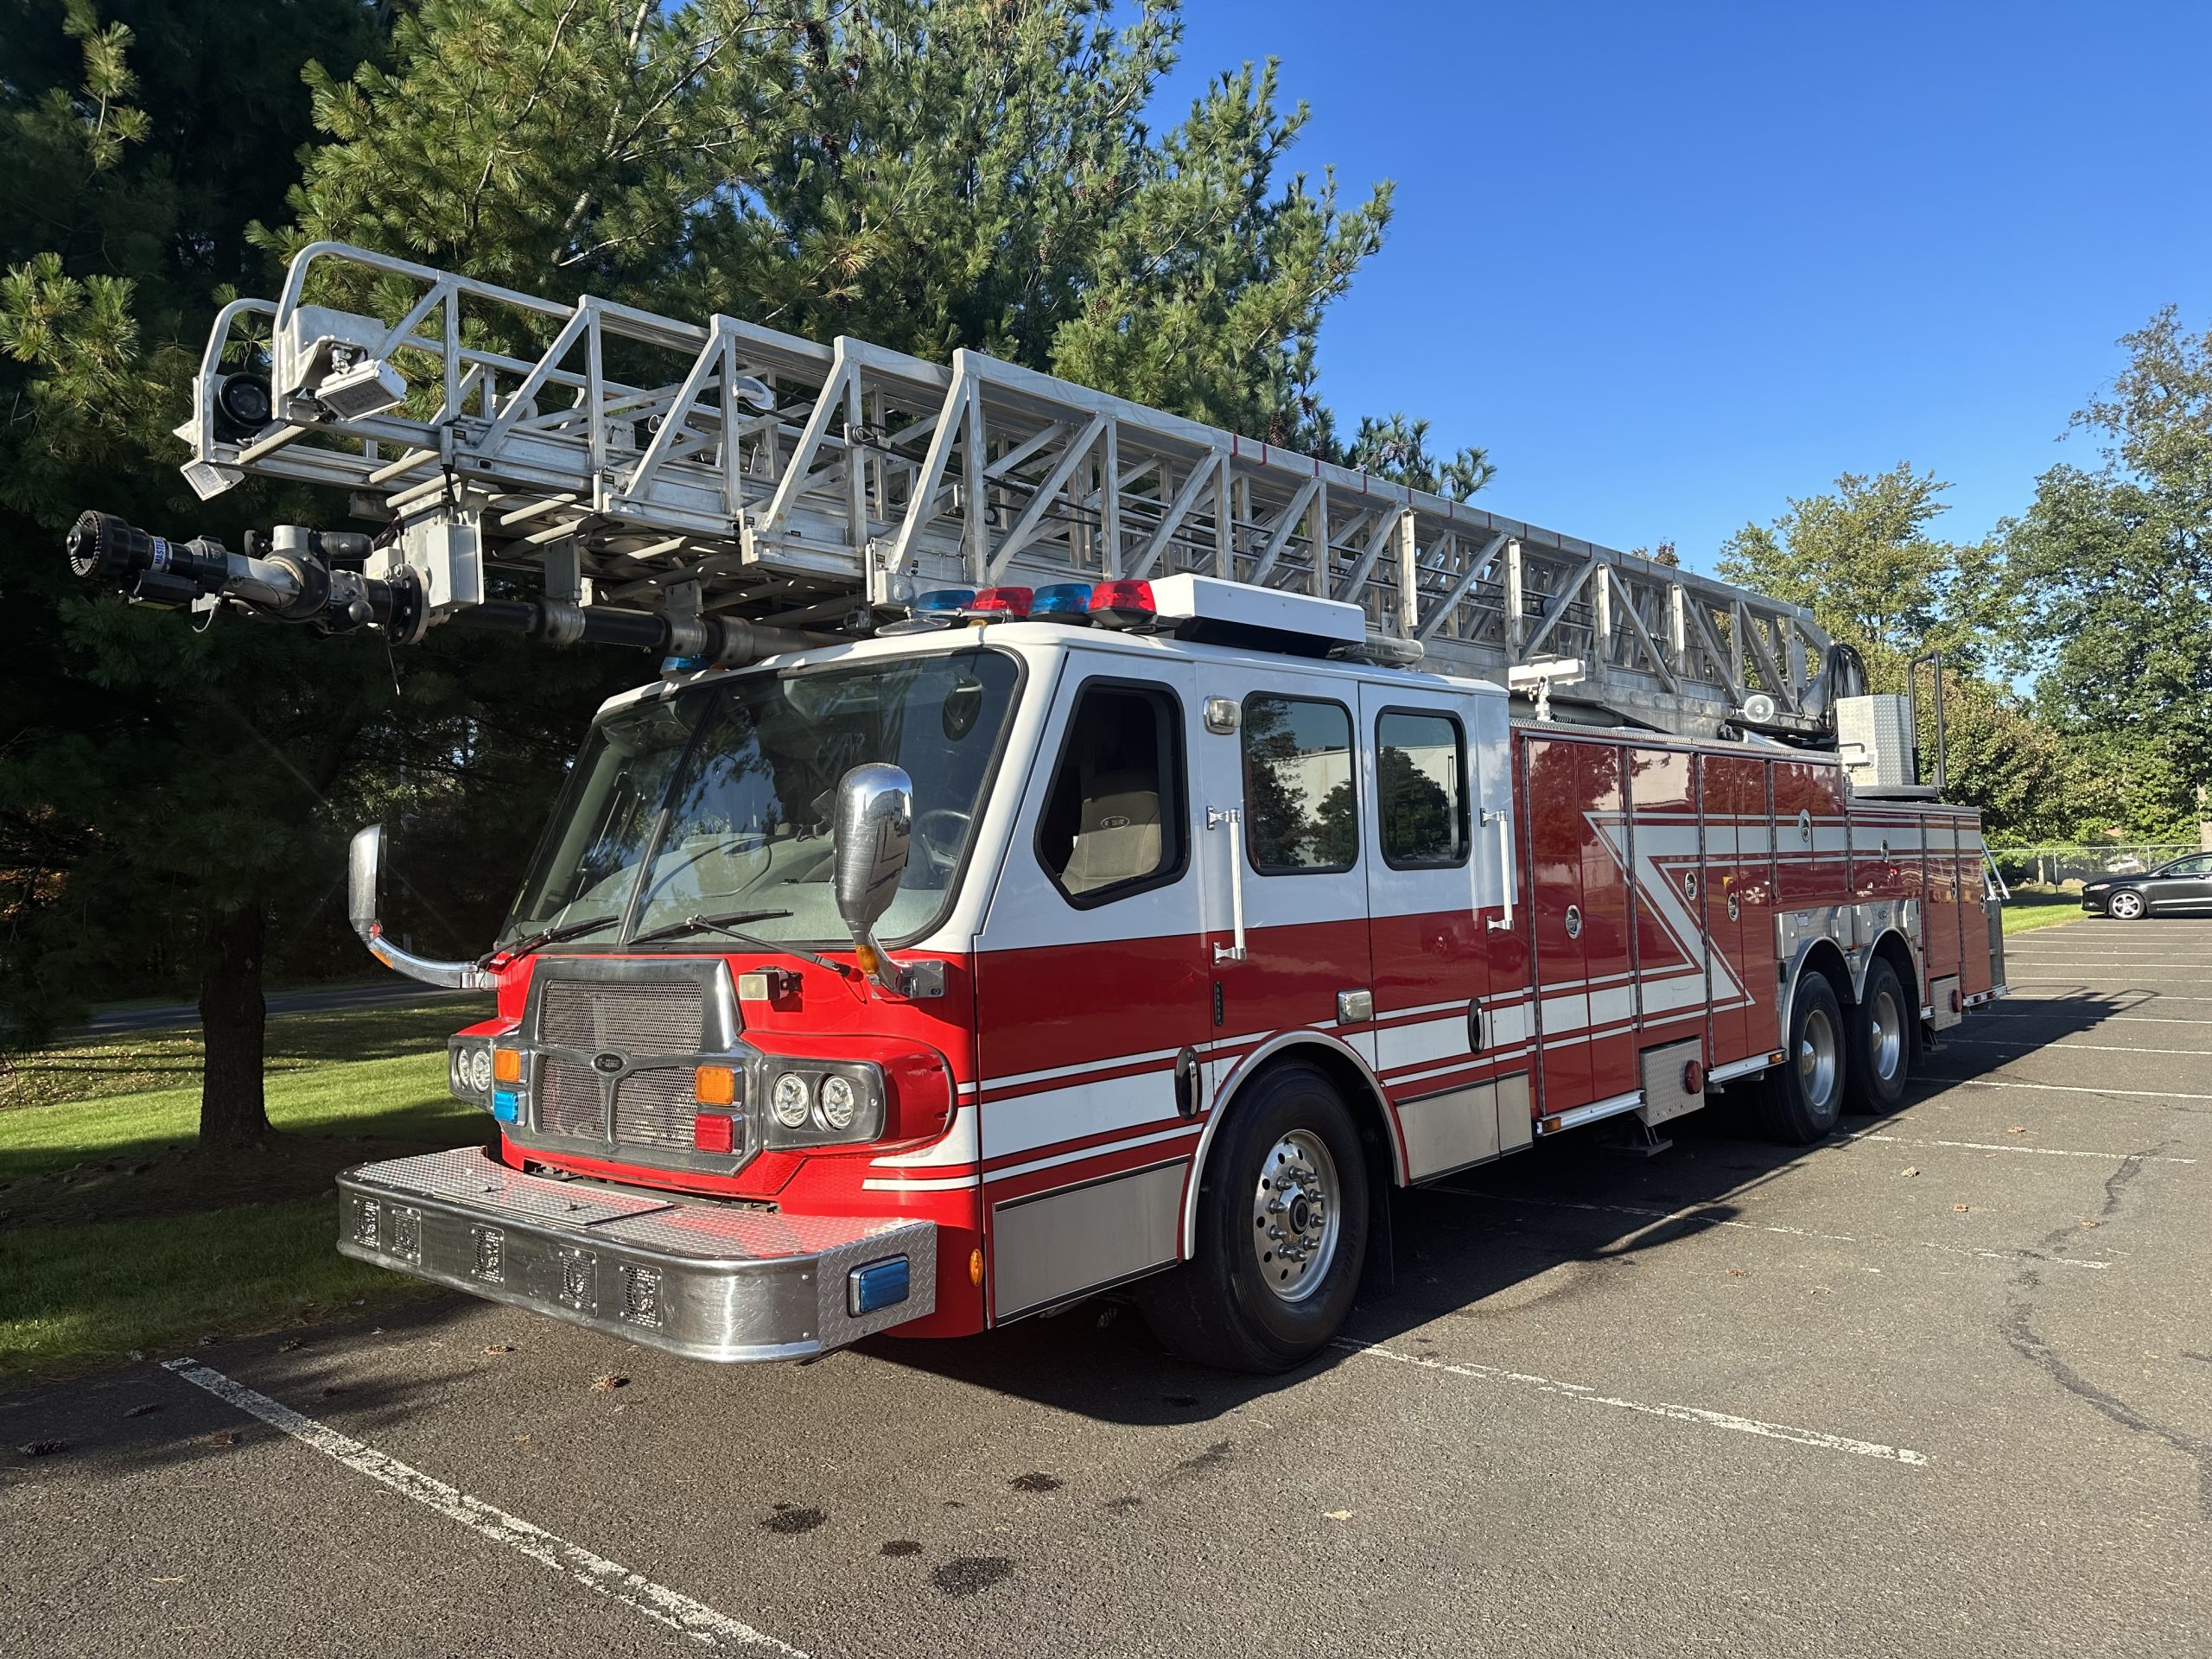 2009 E-One 135’ Aerial F006 - fire truck for sale PA